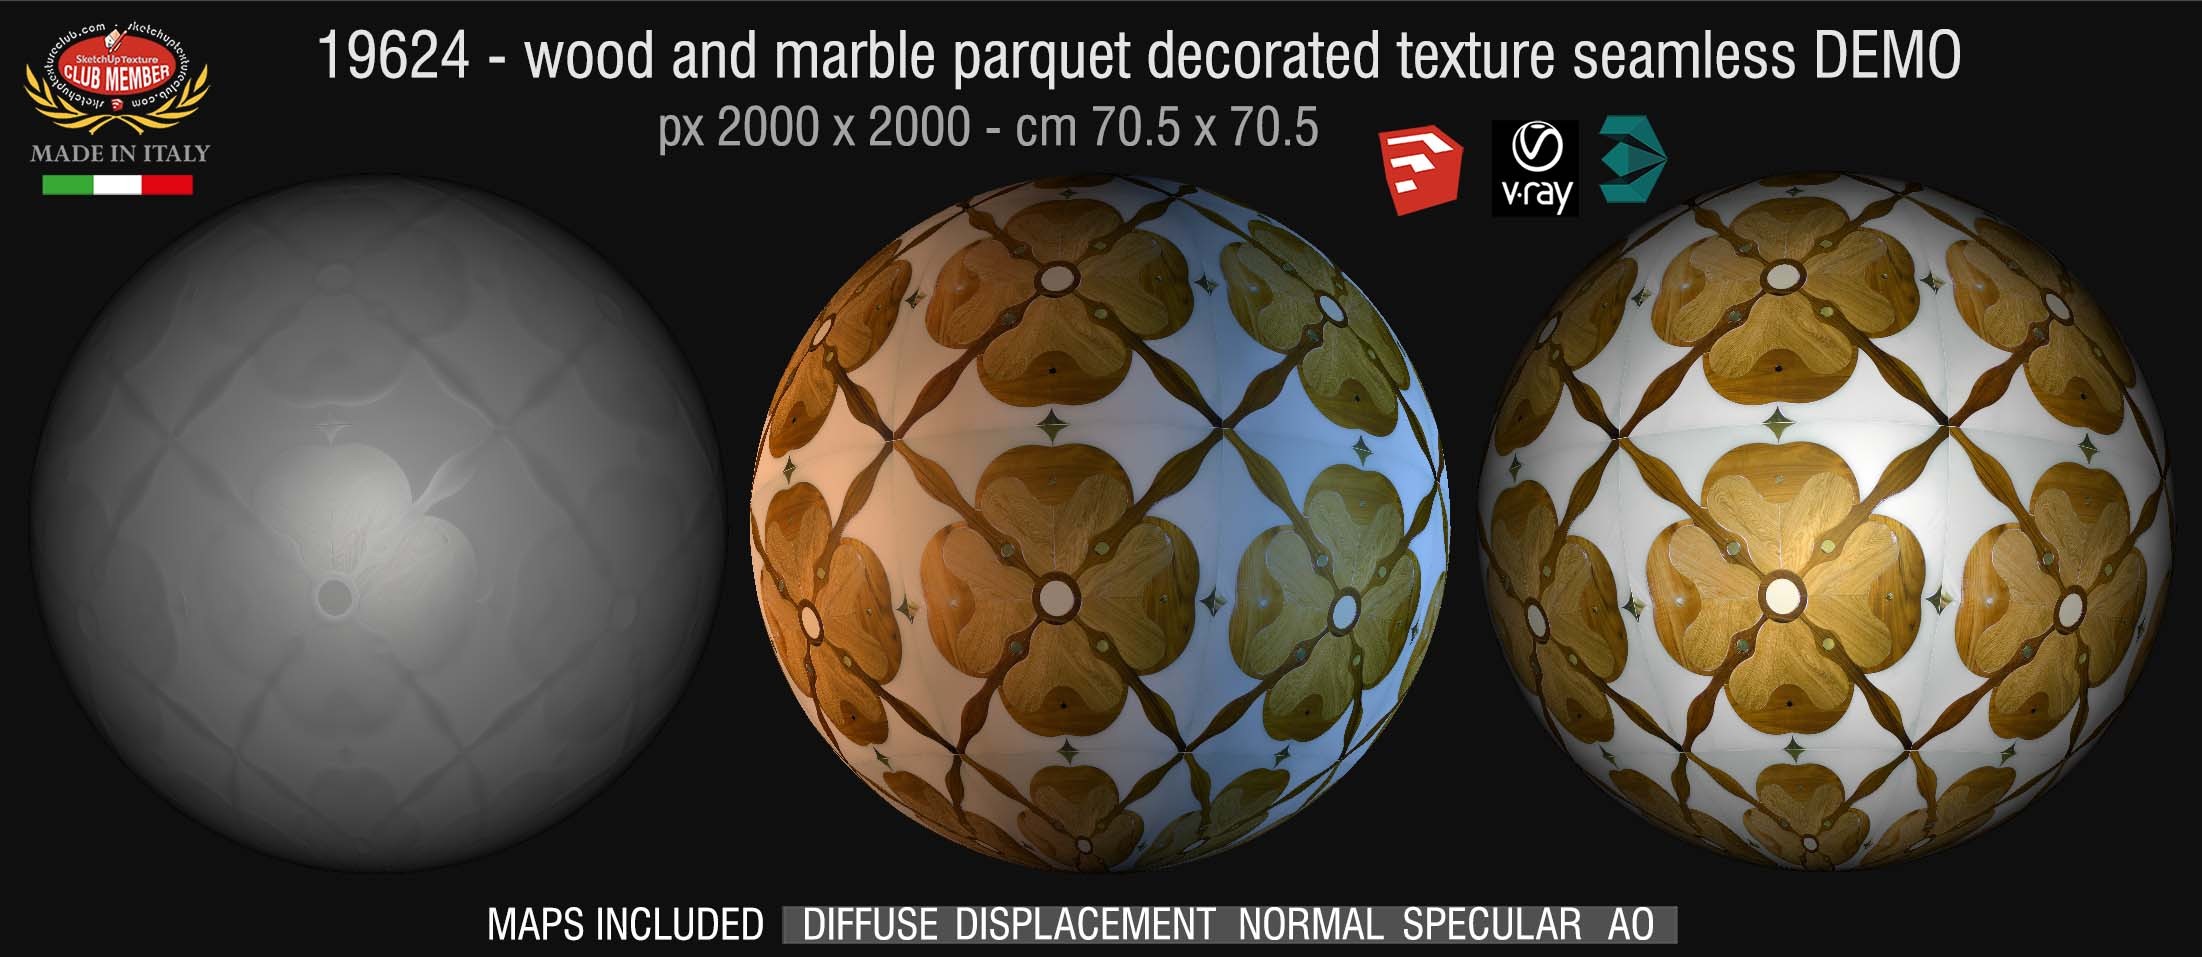 19624 HR Wood and marble parquet decorated texture seamless + maps DEMO